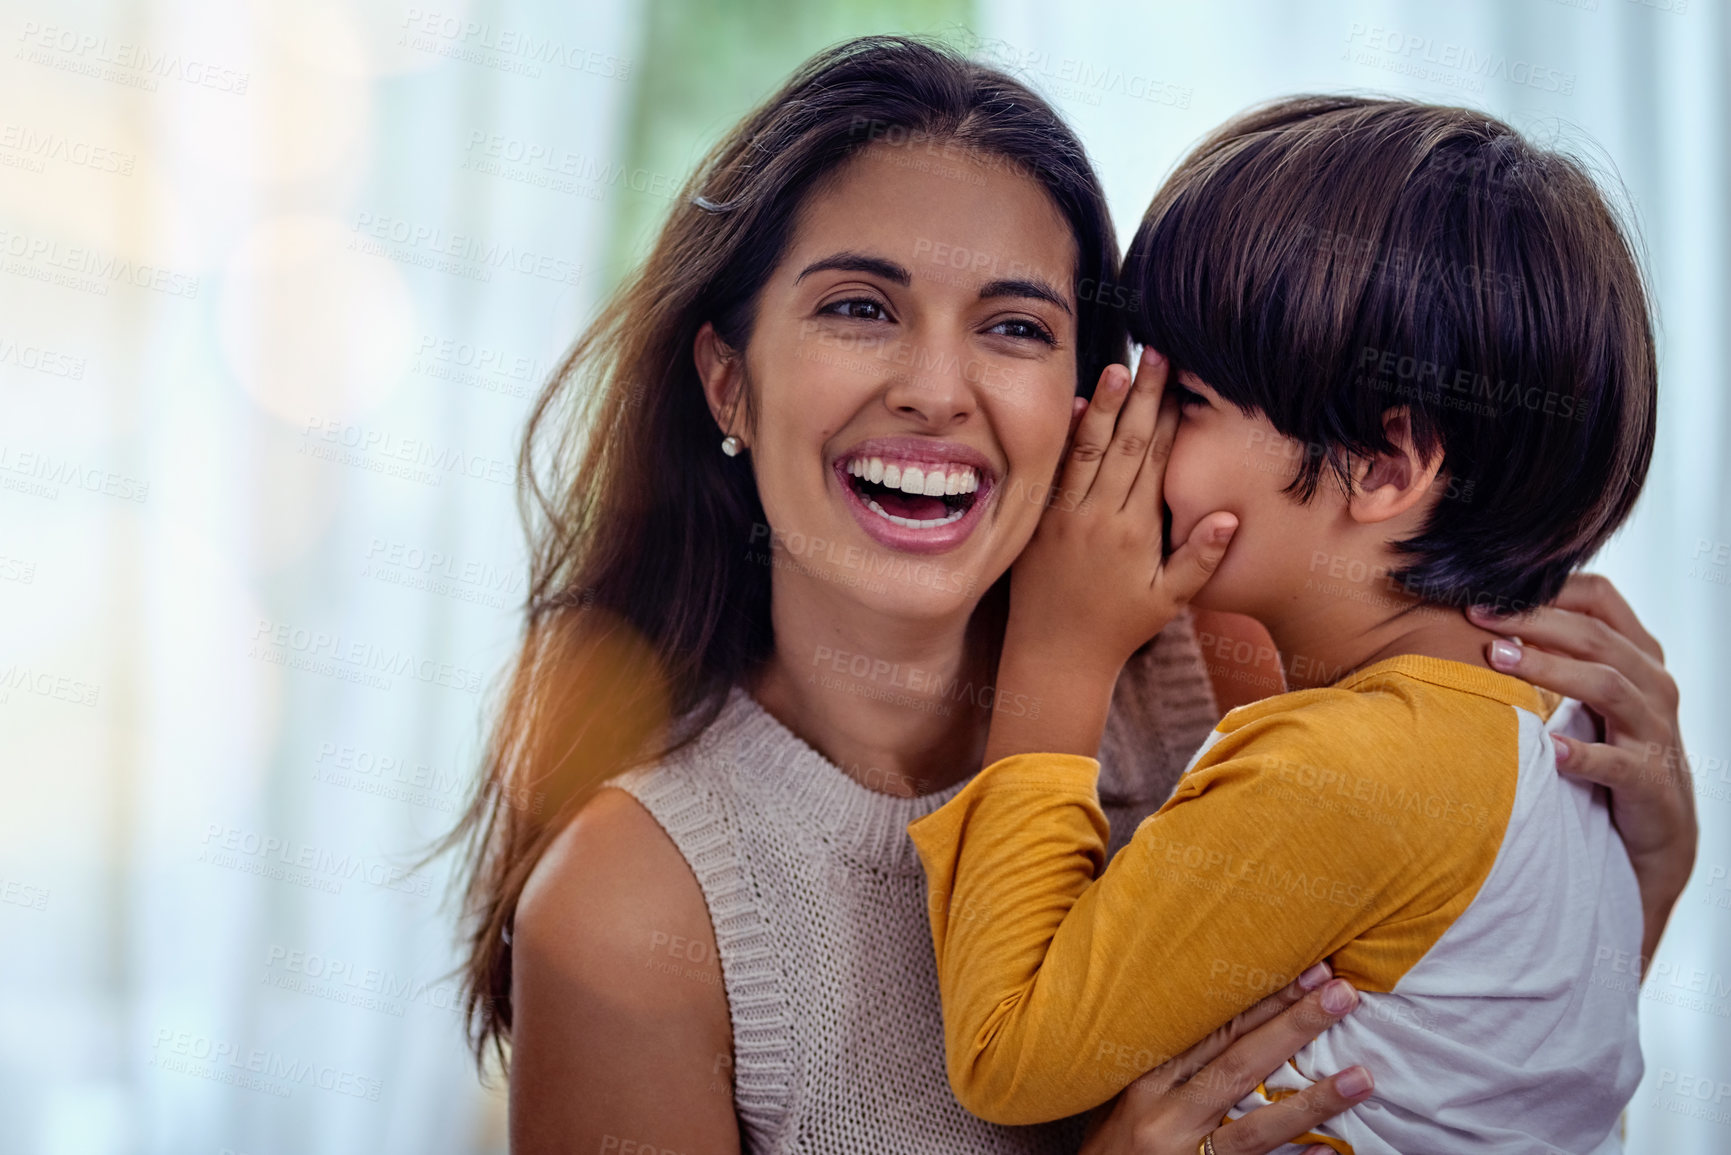 Buy stock photo Shot of an adorable little boy whispering into his mother’s ear